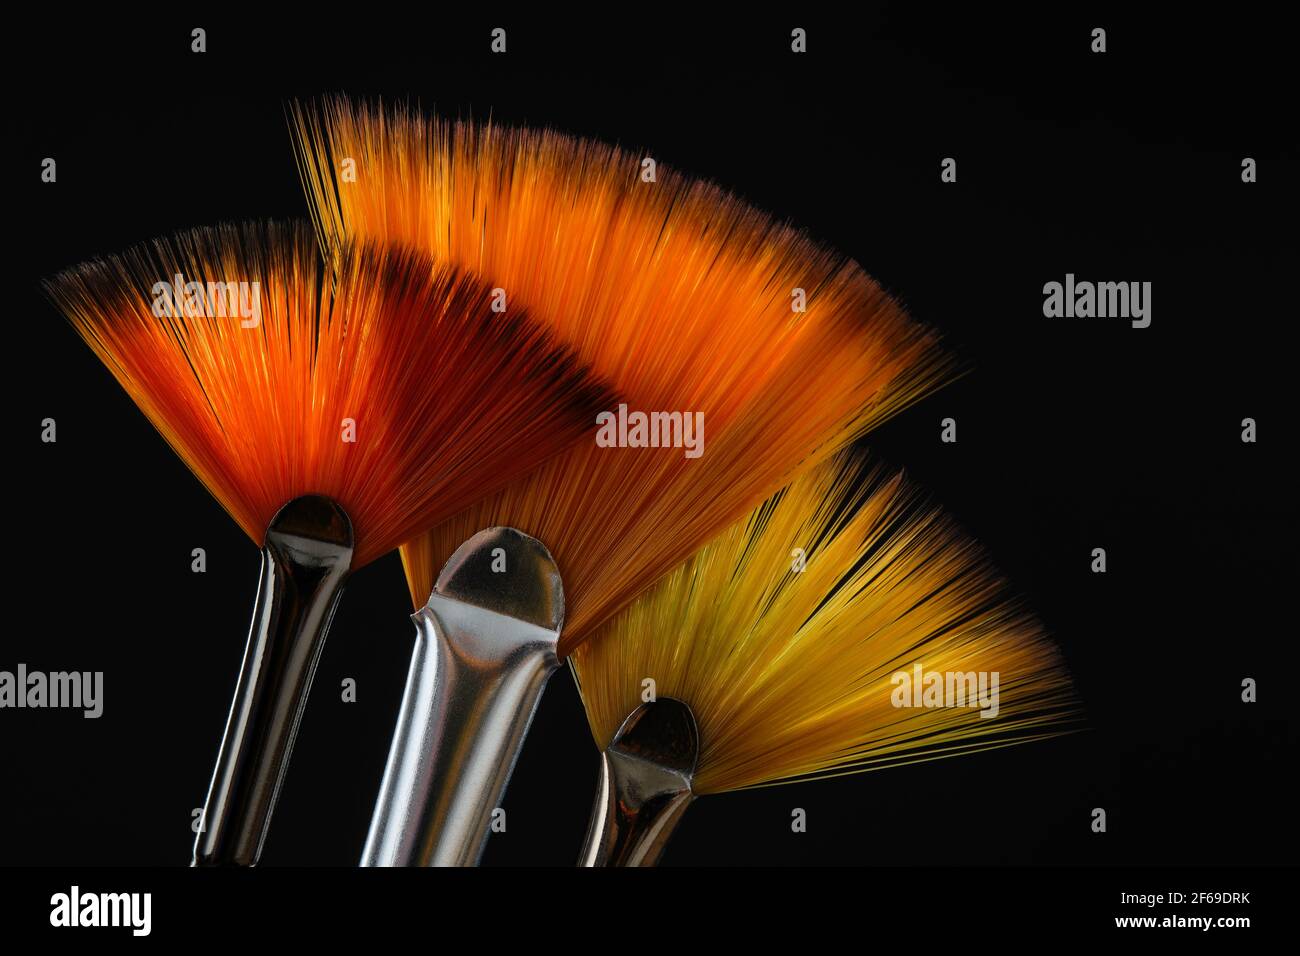 Three fan shaped paintbrushes. Artistic flat fan brushes with orange hairs for watercolor or acrylic painting on black background. Stock Photo